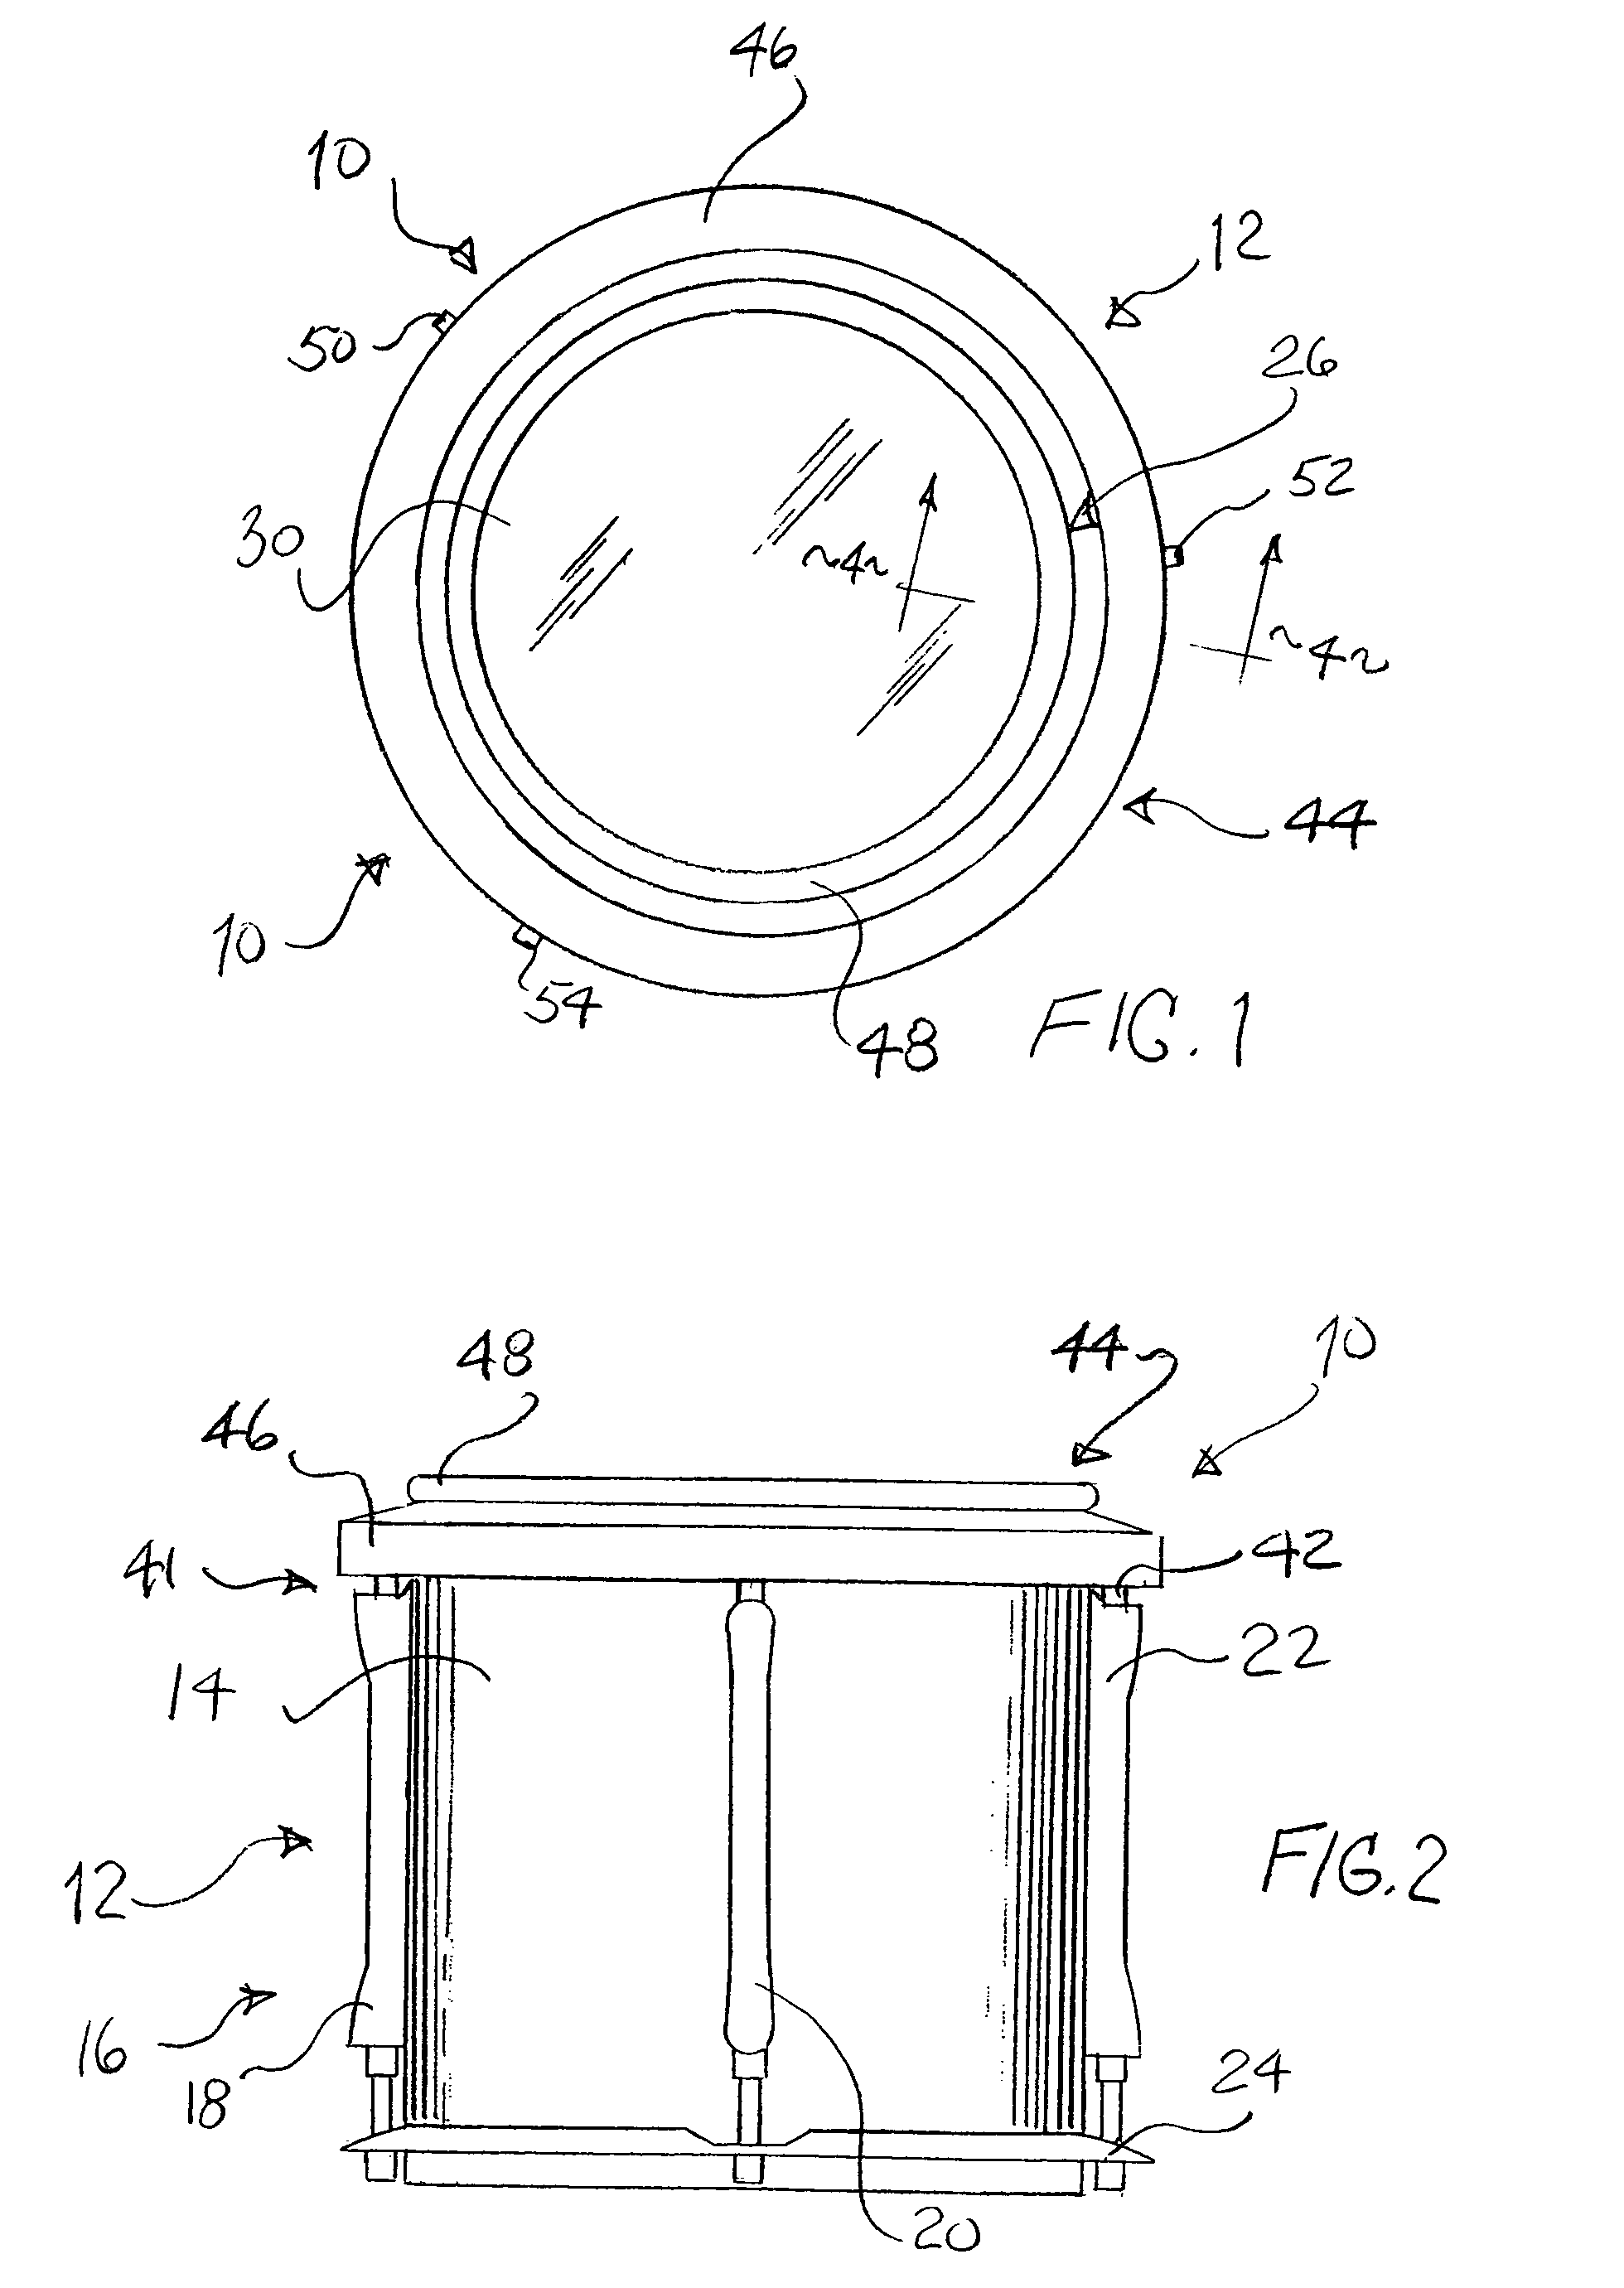 Drumhead tightening and tuning apparatus